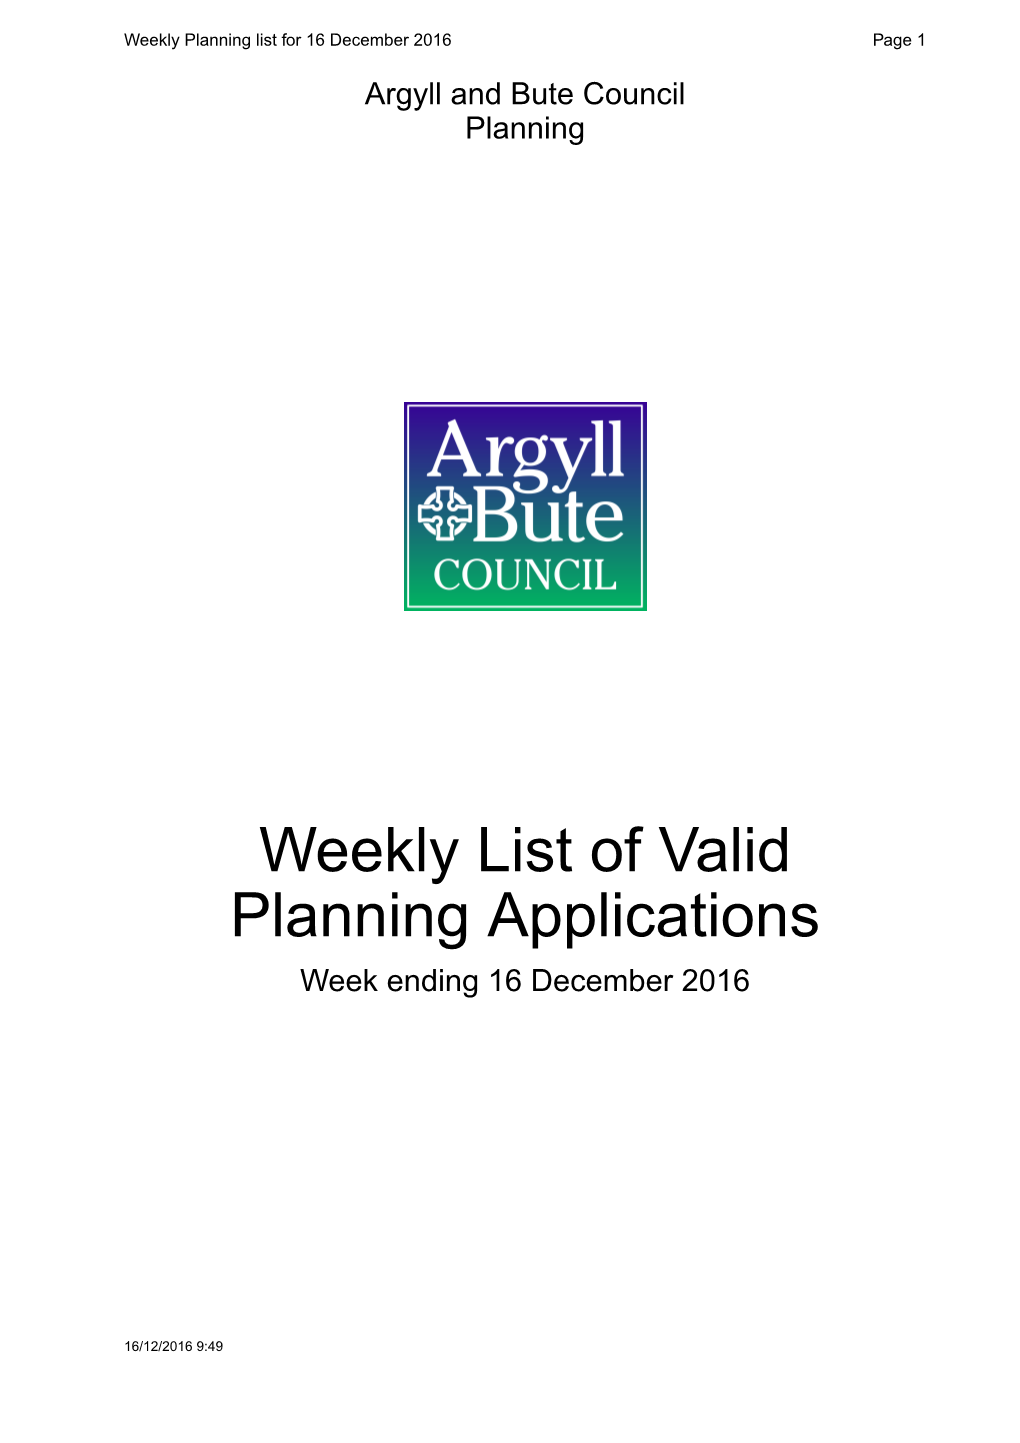 Weekly List of Valid Planning Applications 16Th December 2016.Pdf